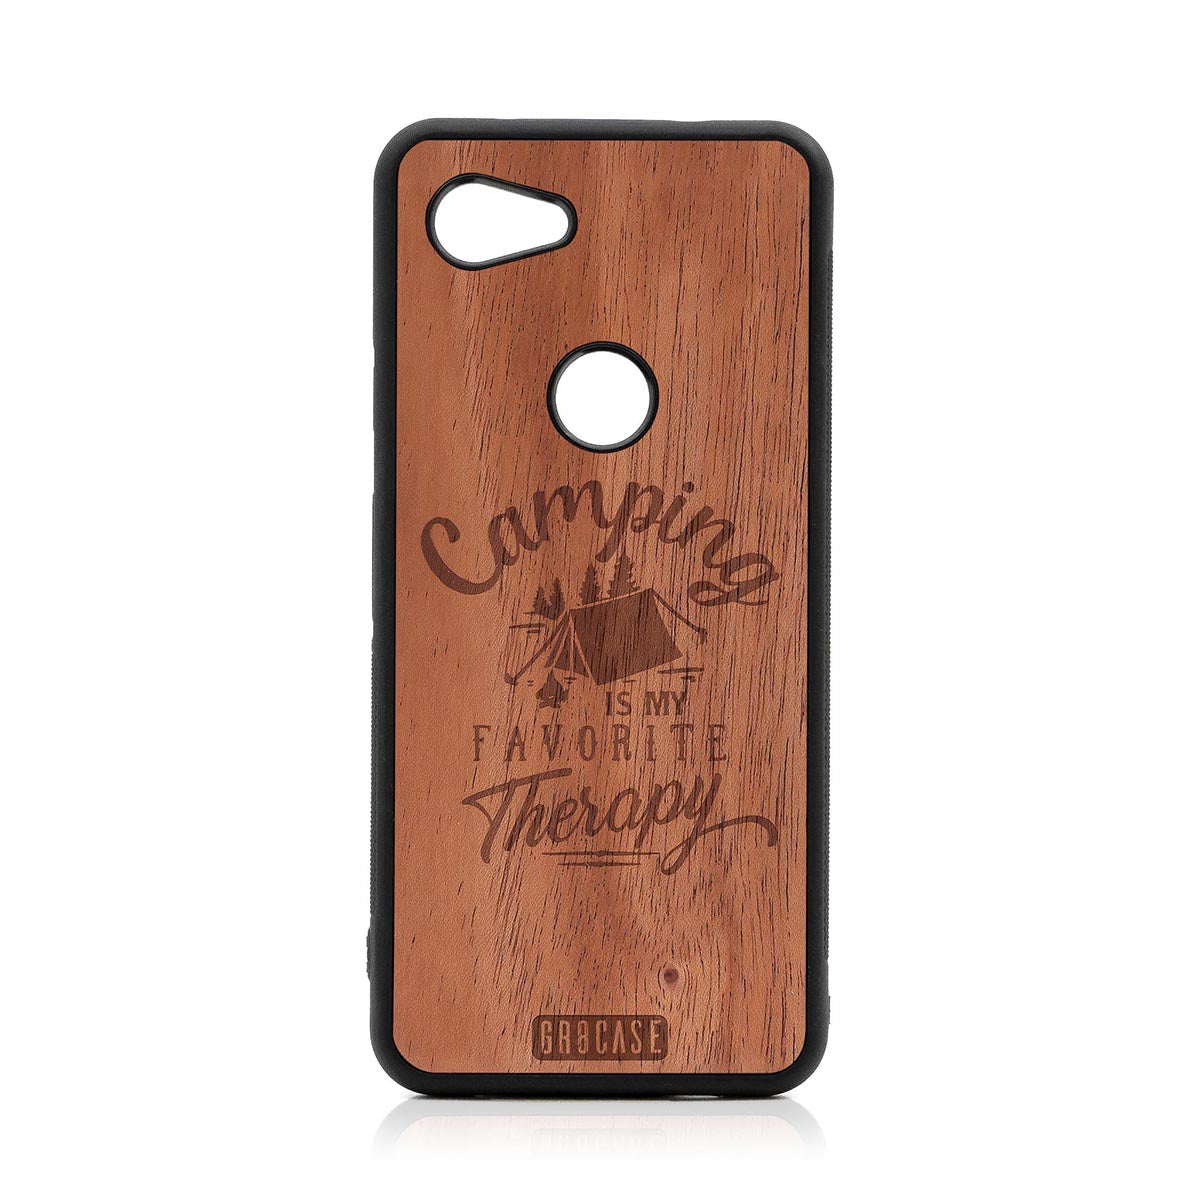 Camping Is My Favorite Therapy Design Wood Case For Google Pixel 3A XL by GR8CASE